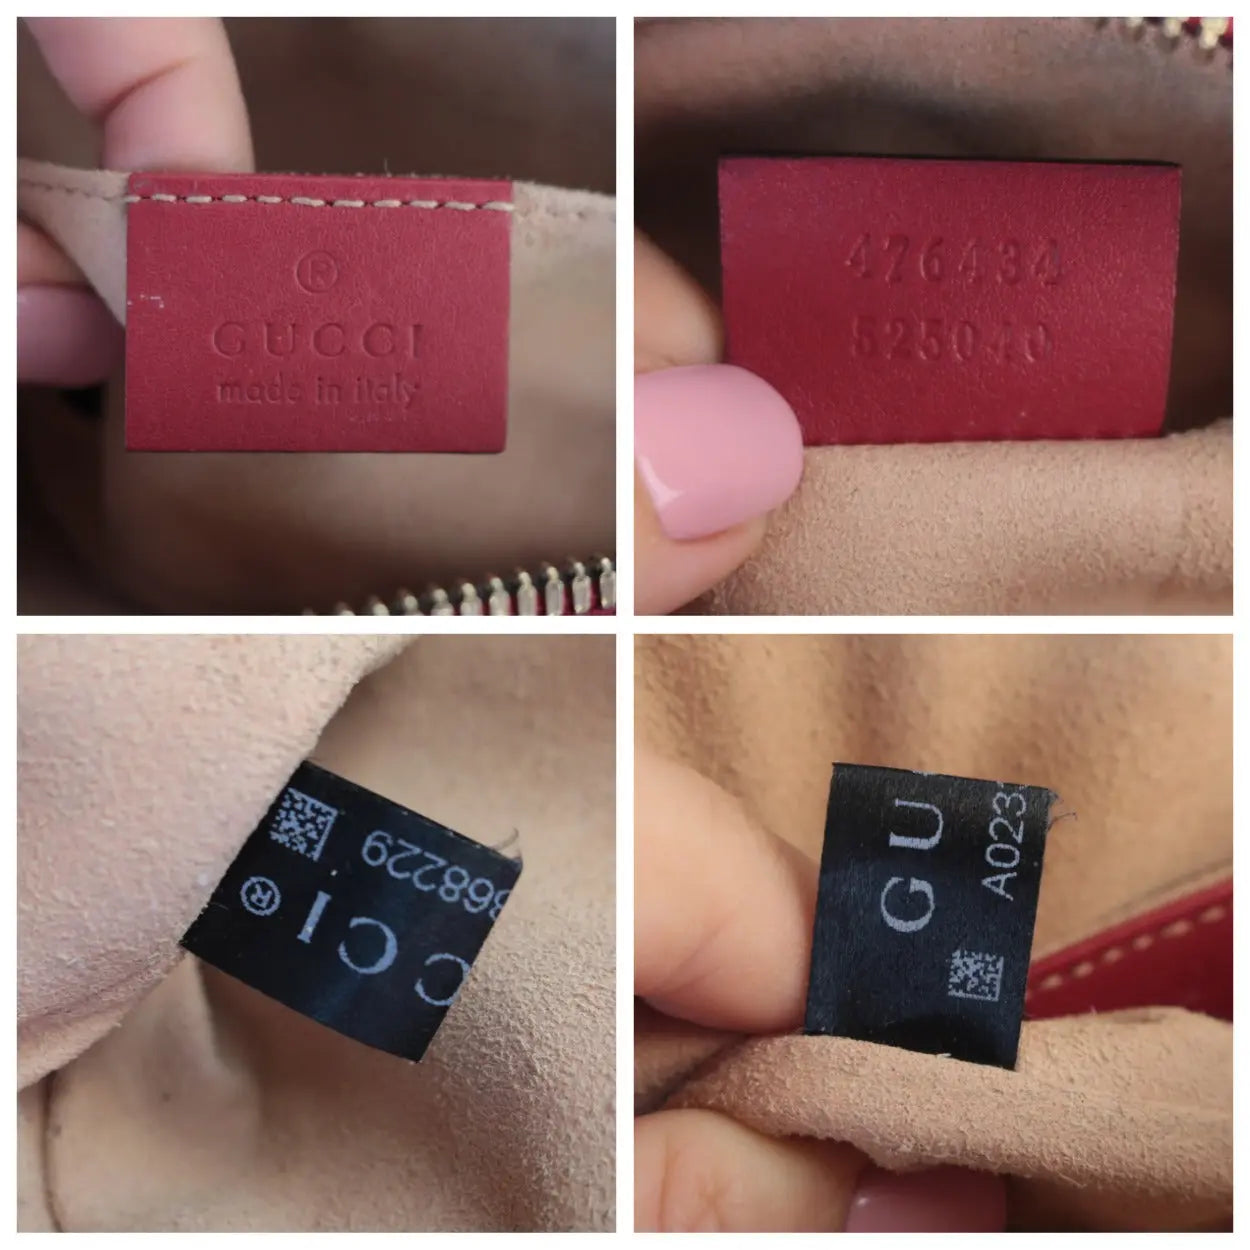 How To Read a Gucci Serial Number?